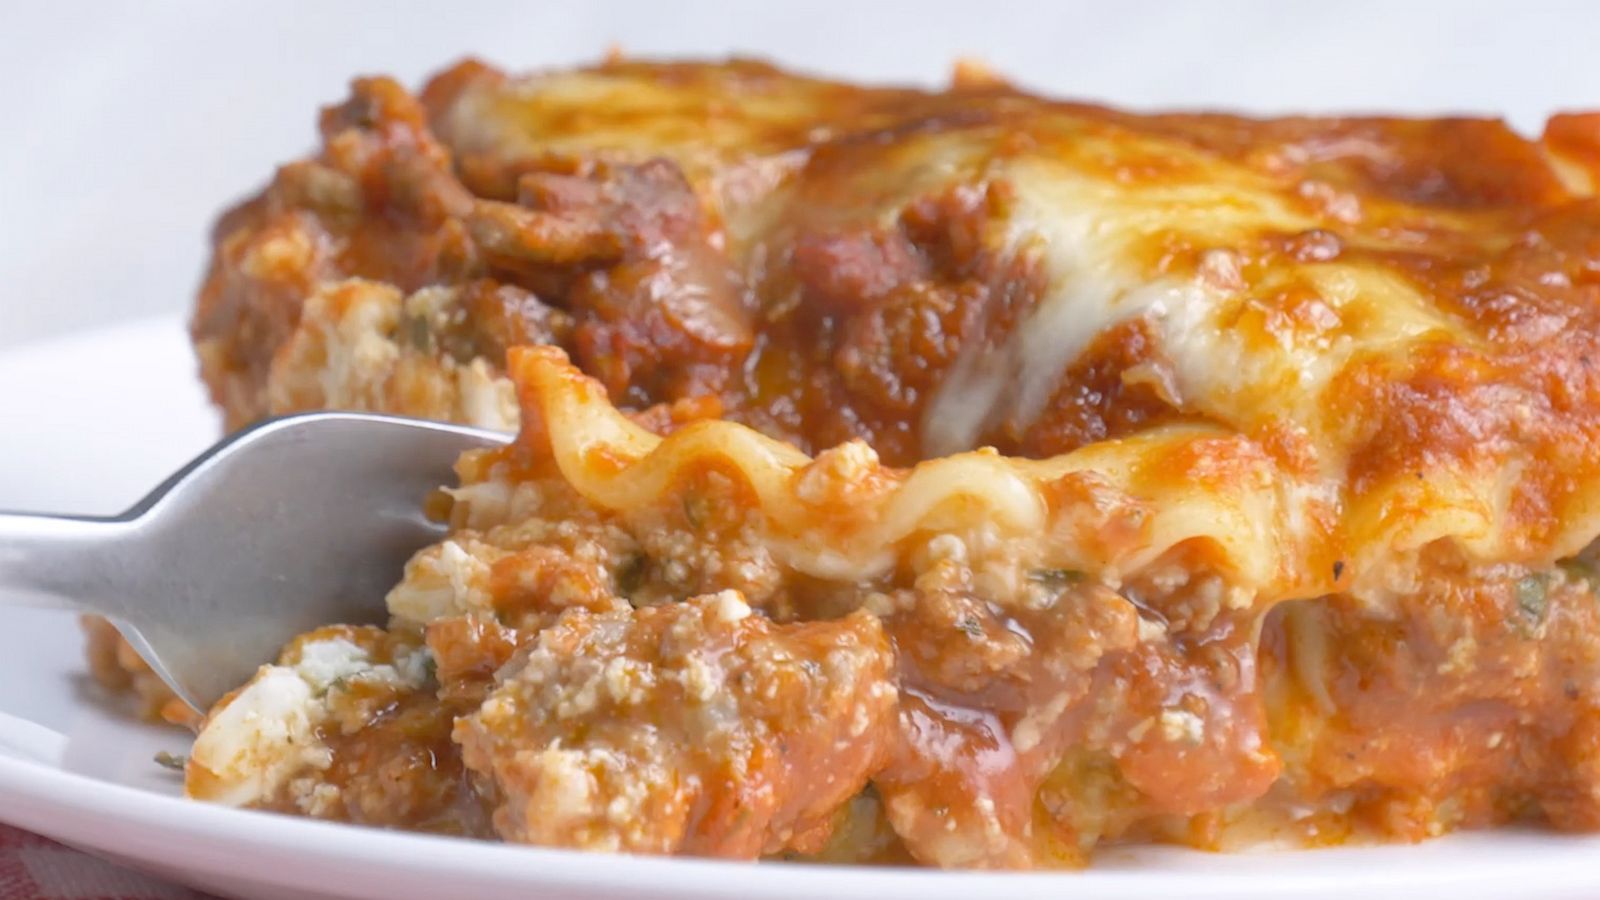 Homemade Lasagna from Taste of Home is the best way to indulge with